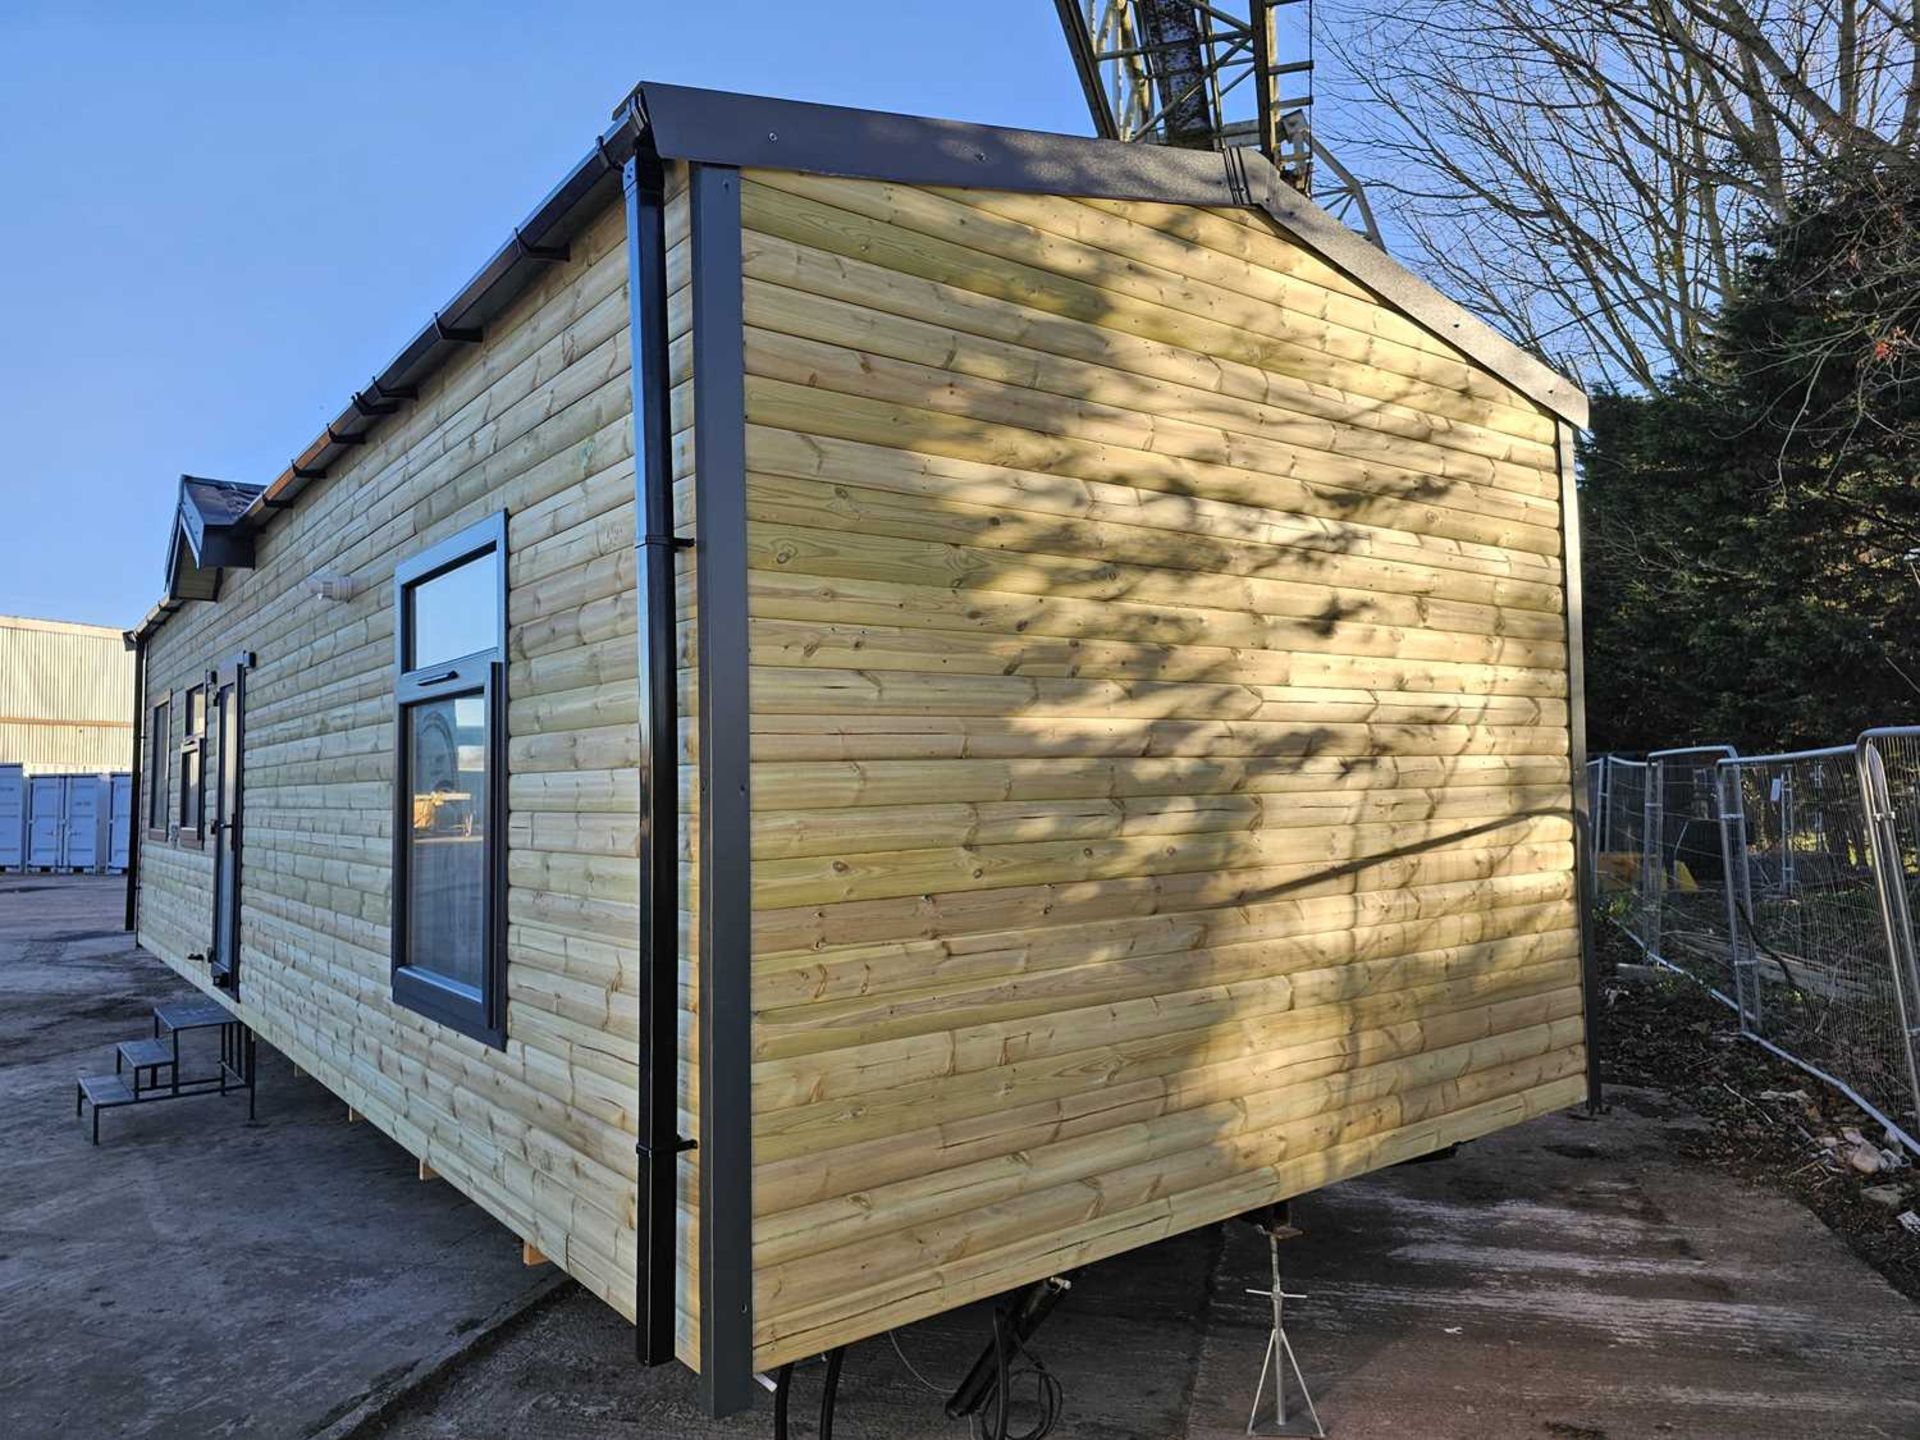 Unused The Steel Holiday Homes Ltd 36' x 12' (Steel Structure) 2 Bedroom Timber Clad Lodge, Shower R - Image 2 of 23